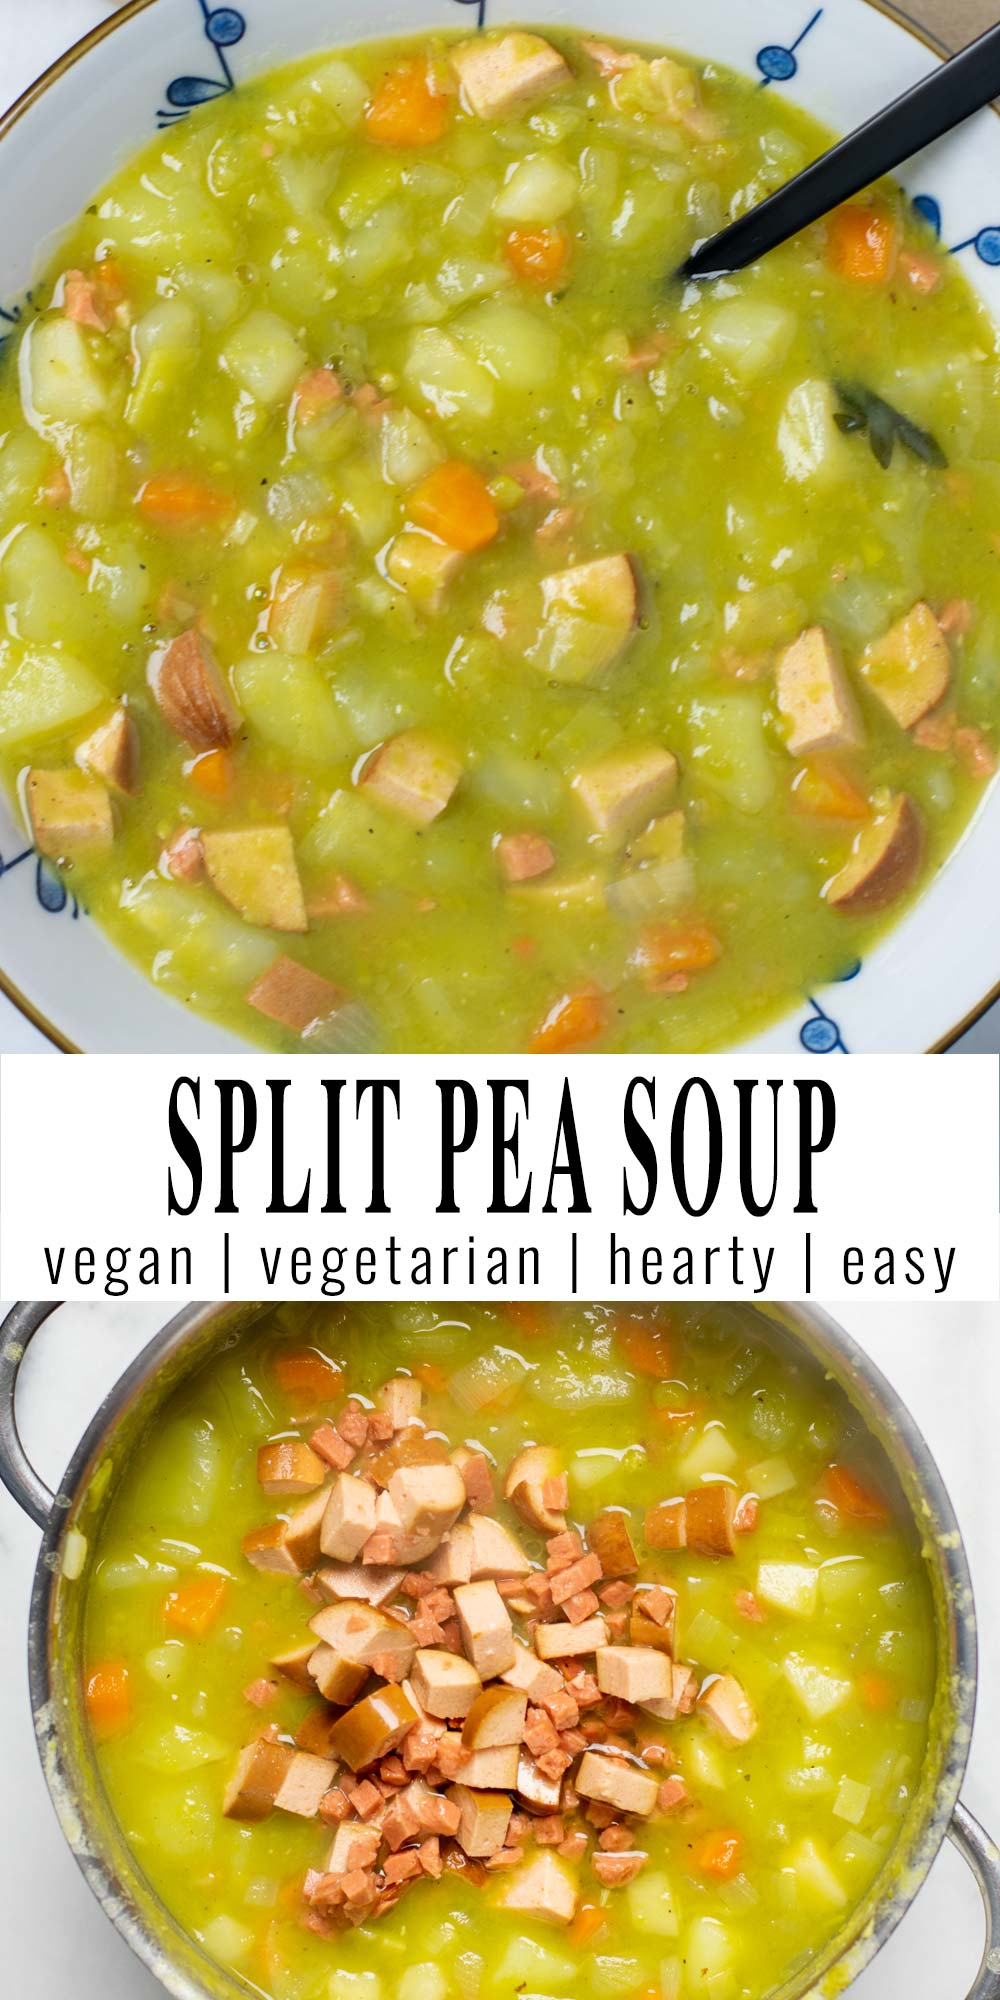 Collage of two pictures of the Split Pea Soup with recipe title text.